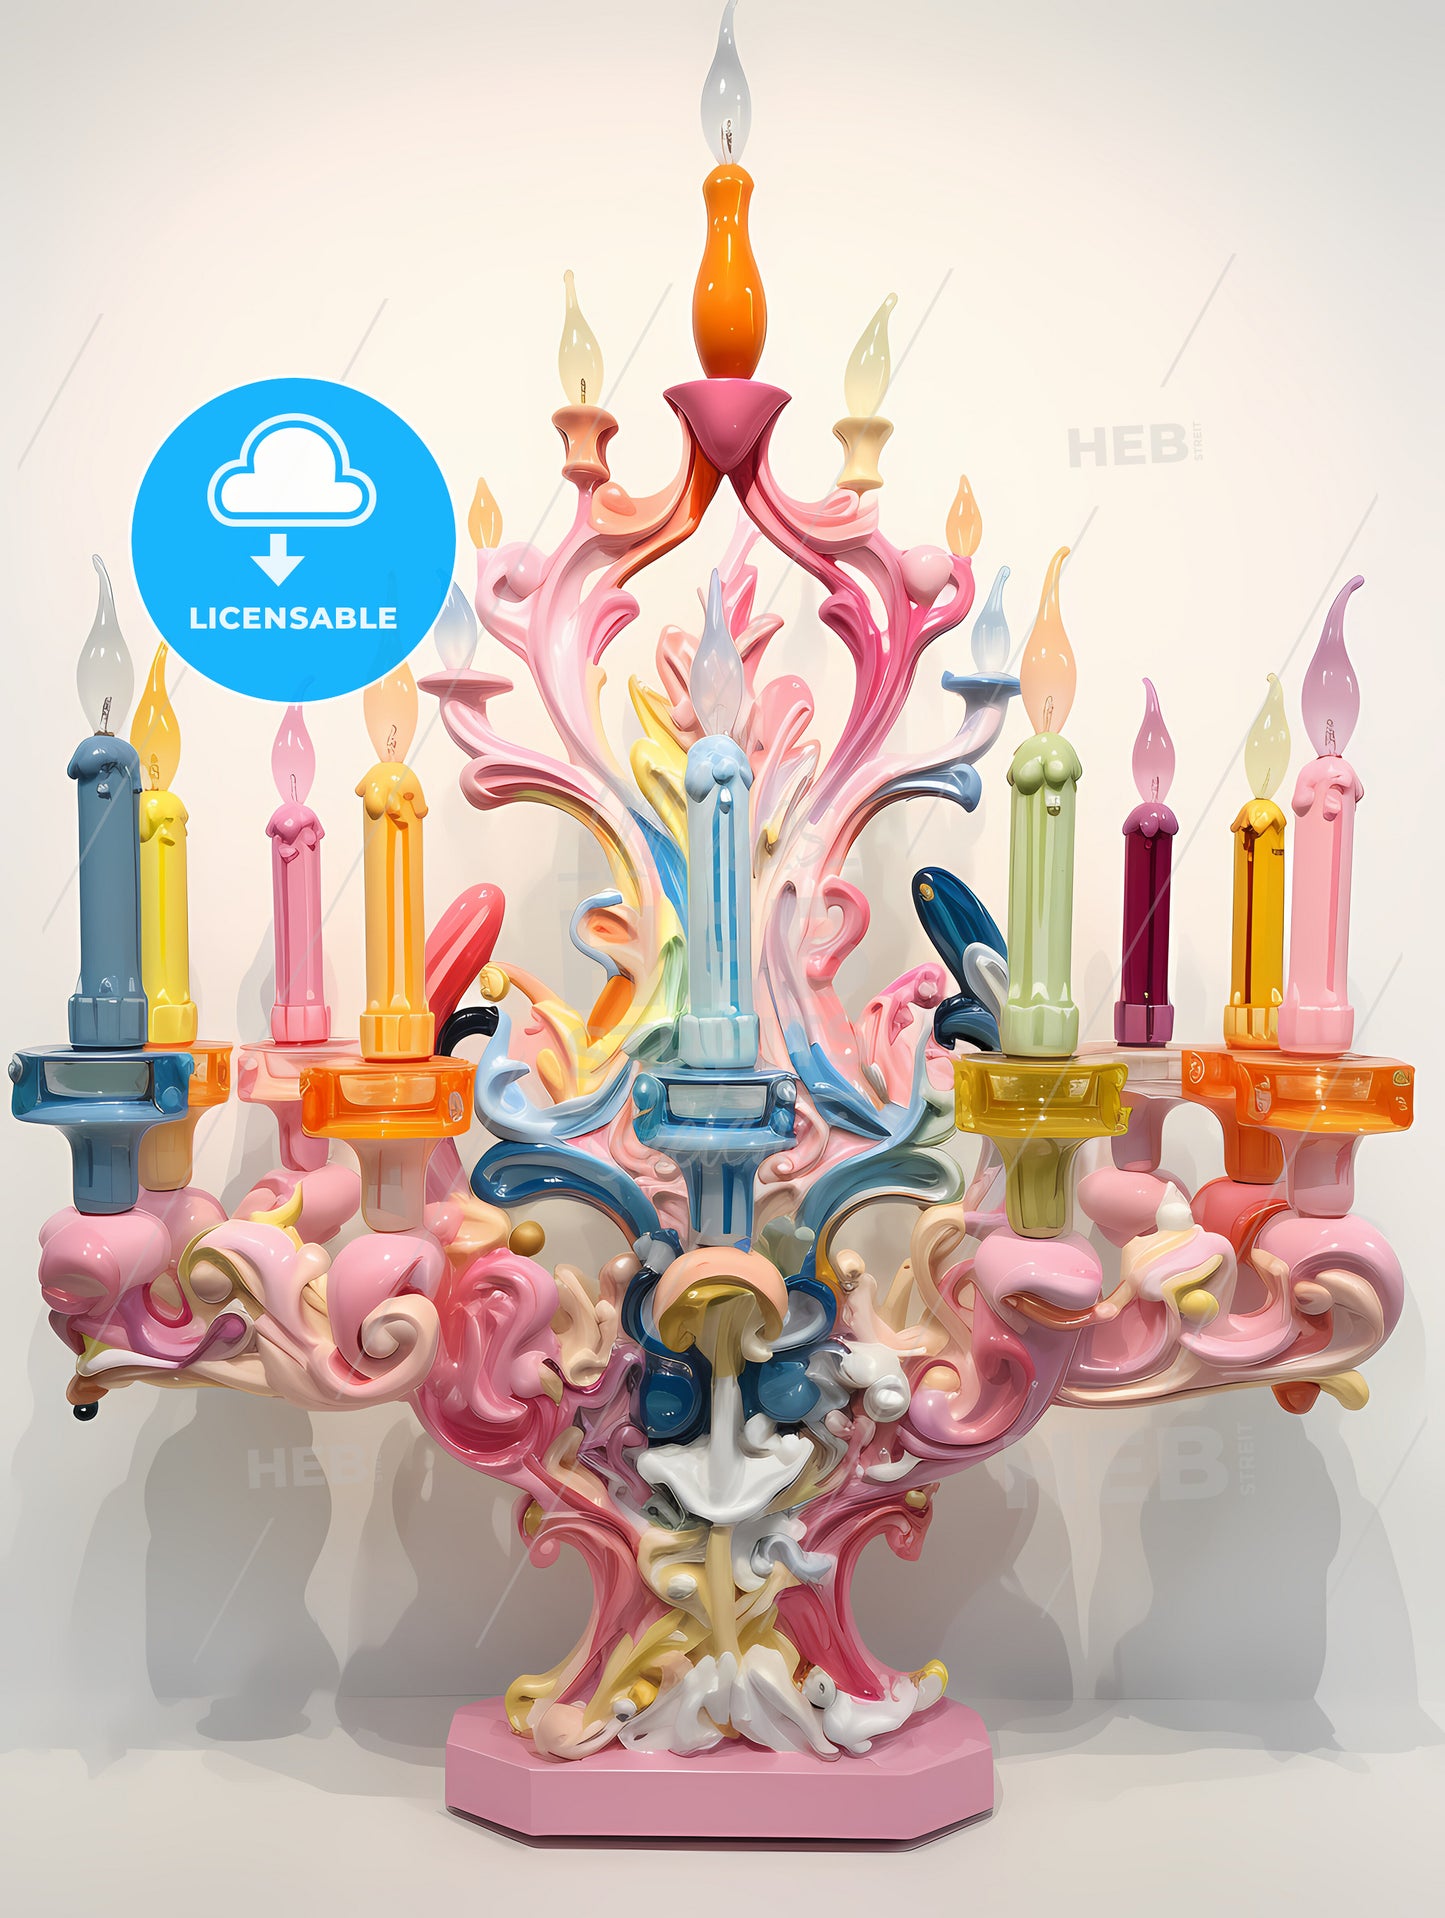 A Colorful Menorah Painted On White, A Colorful Candle Holder With Candles